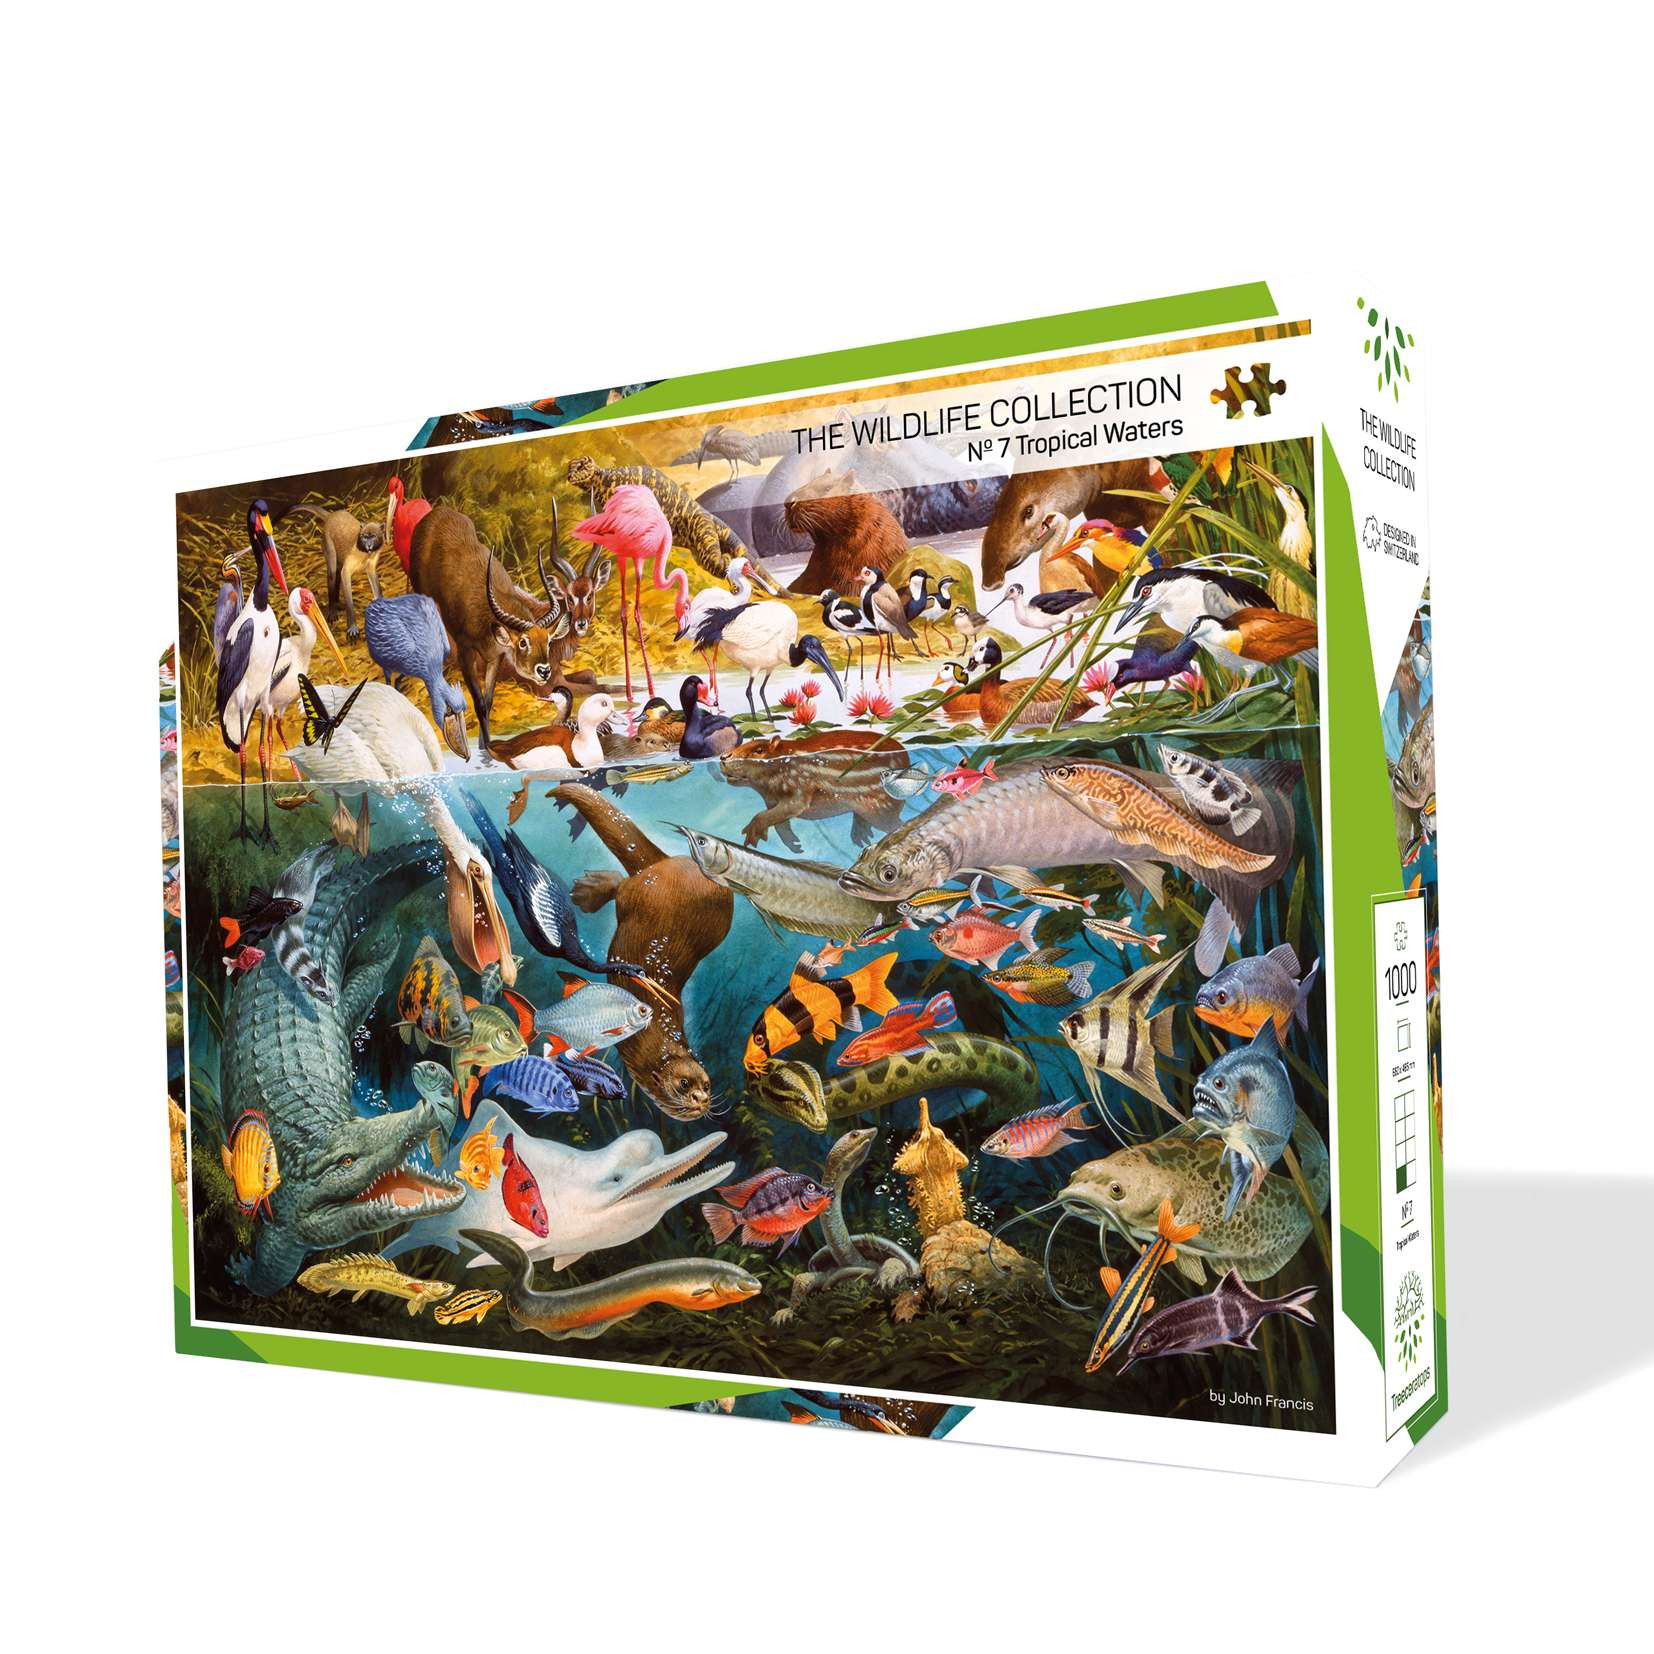 Zoo Tycoon: The Board Game Deluxe – The official board game adaptation